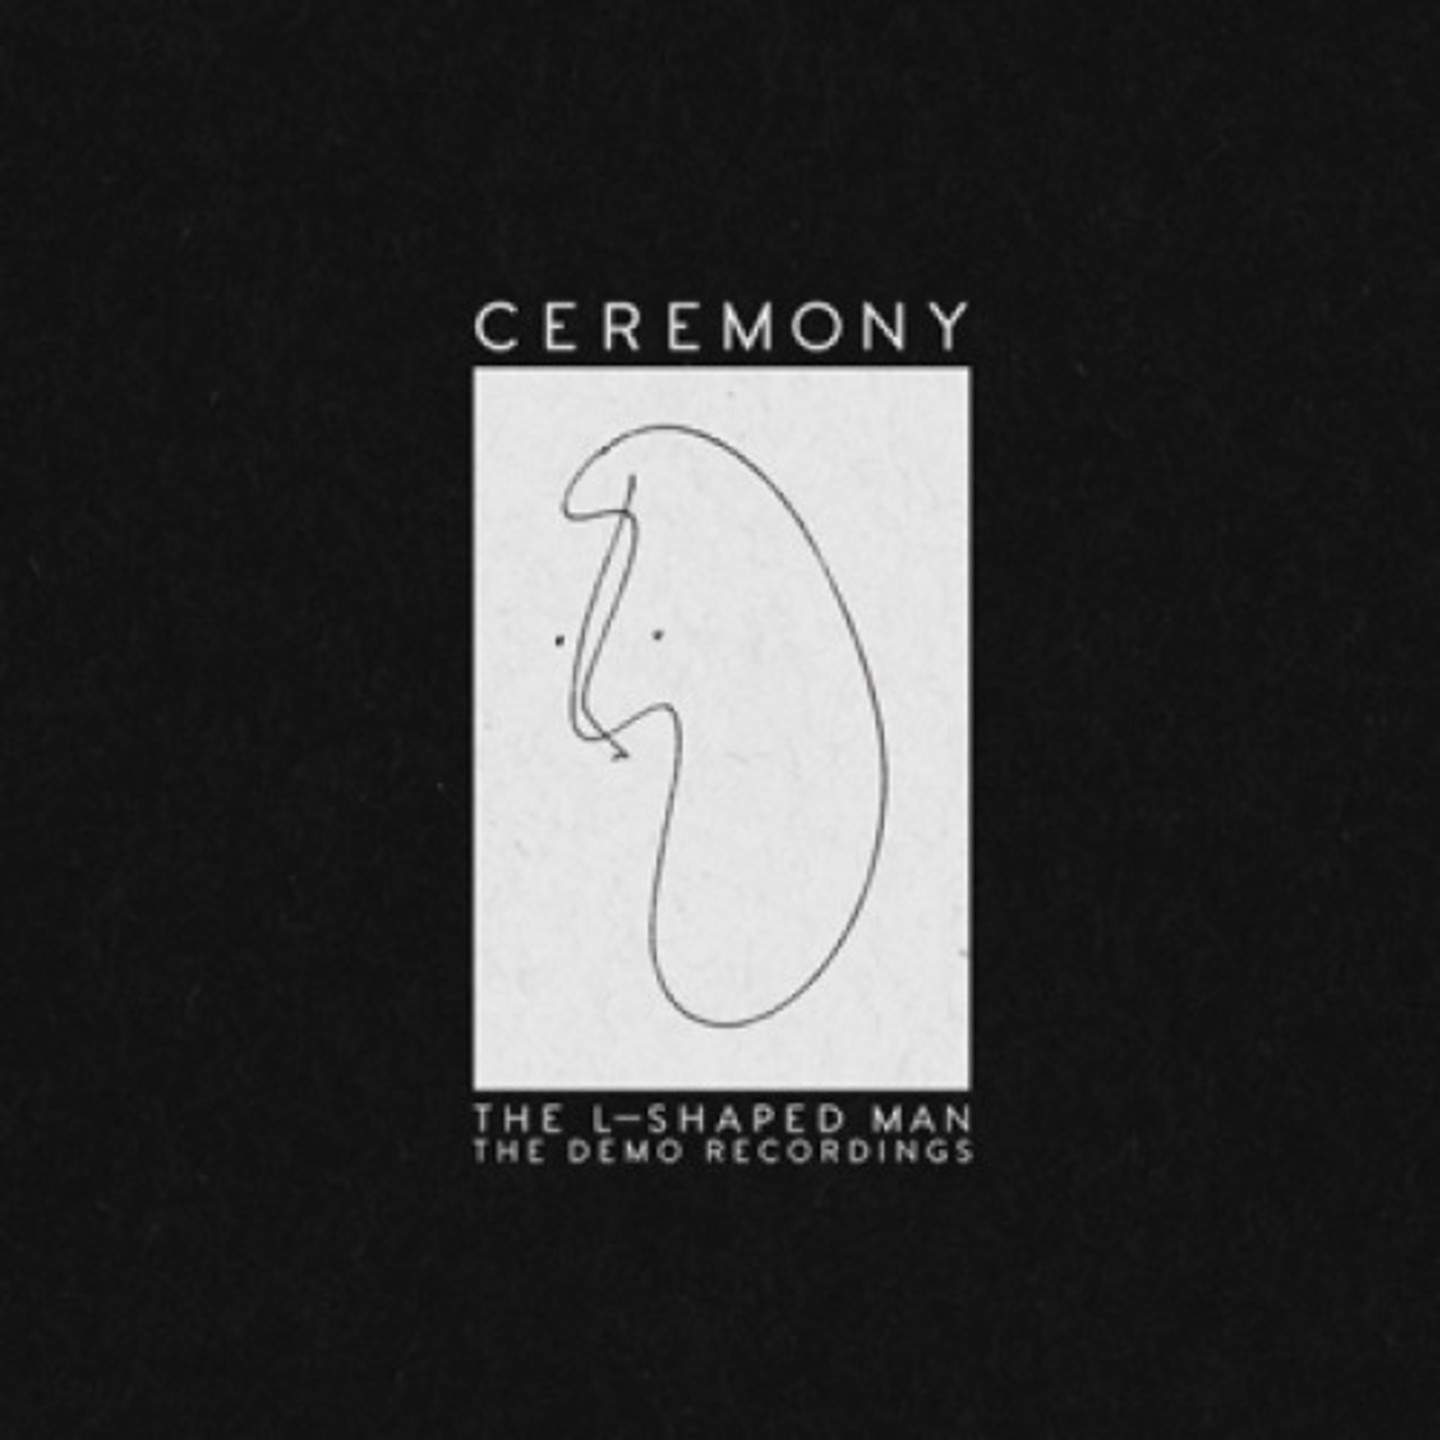 CEREMONY - The L-Shaped Man The Demo Recordings LP